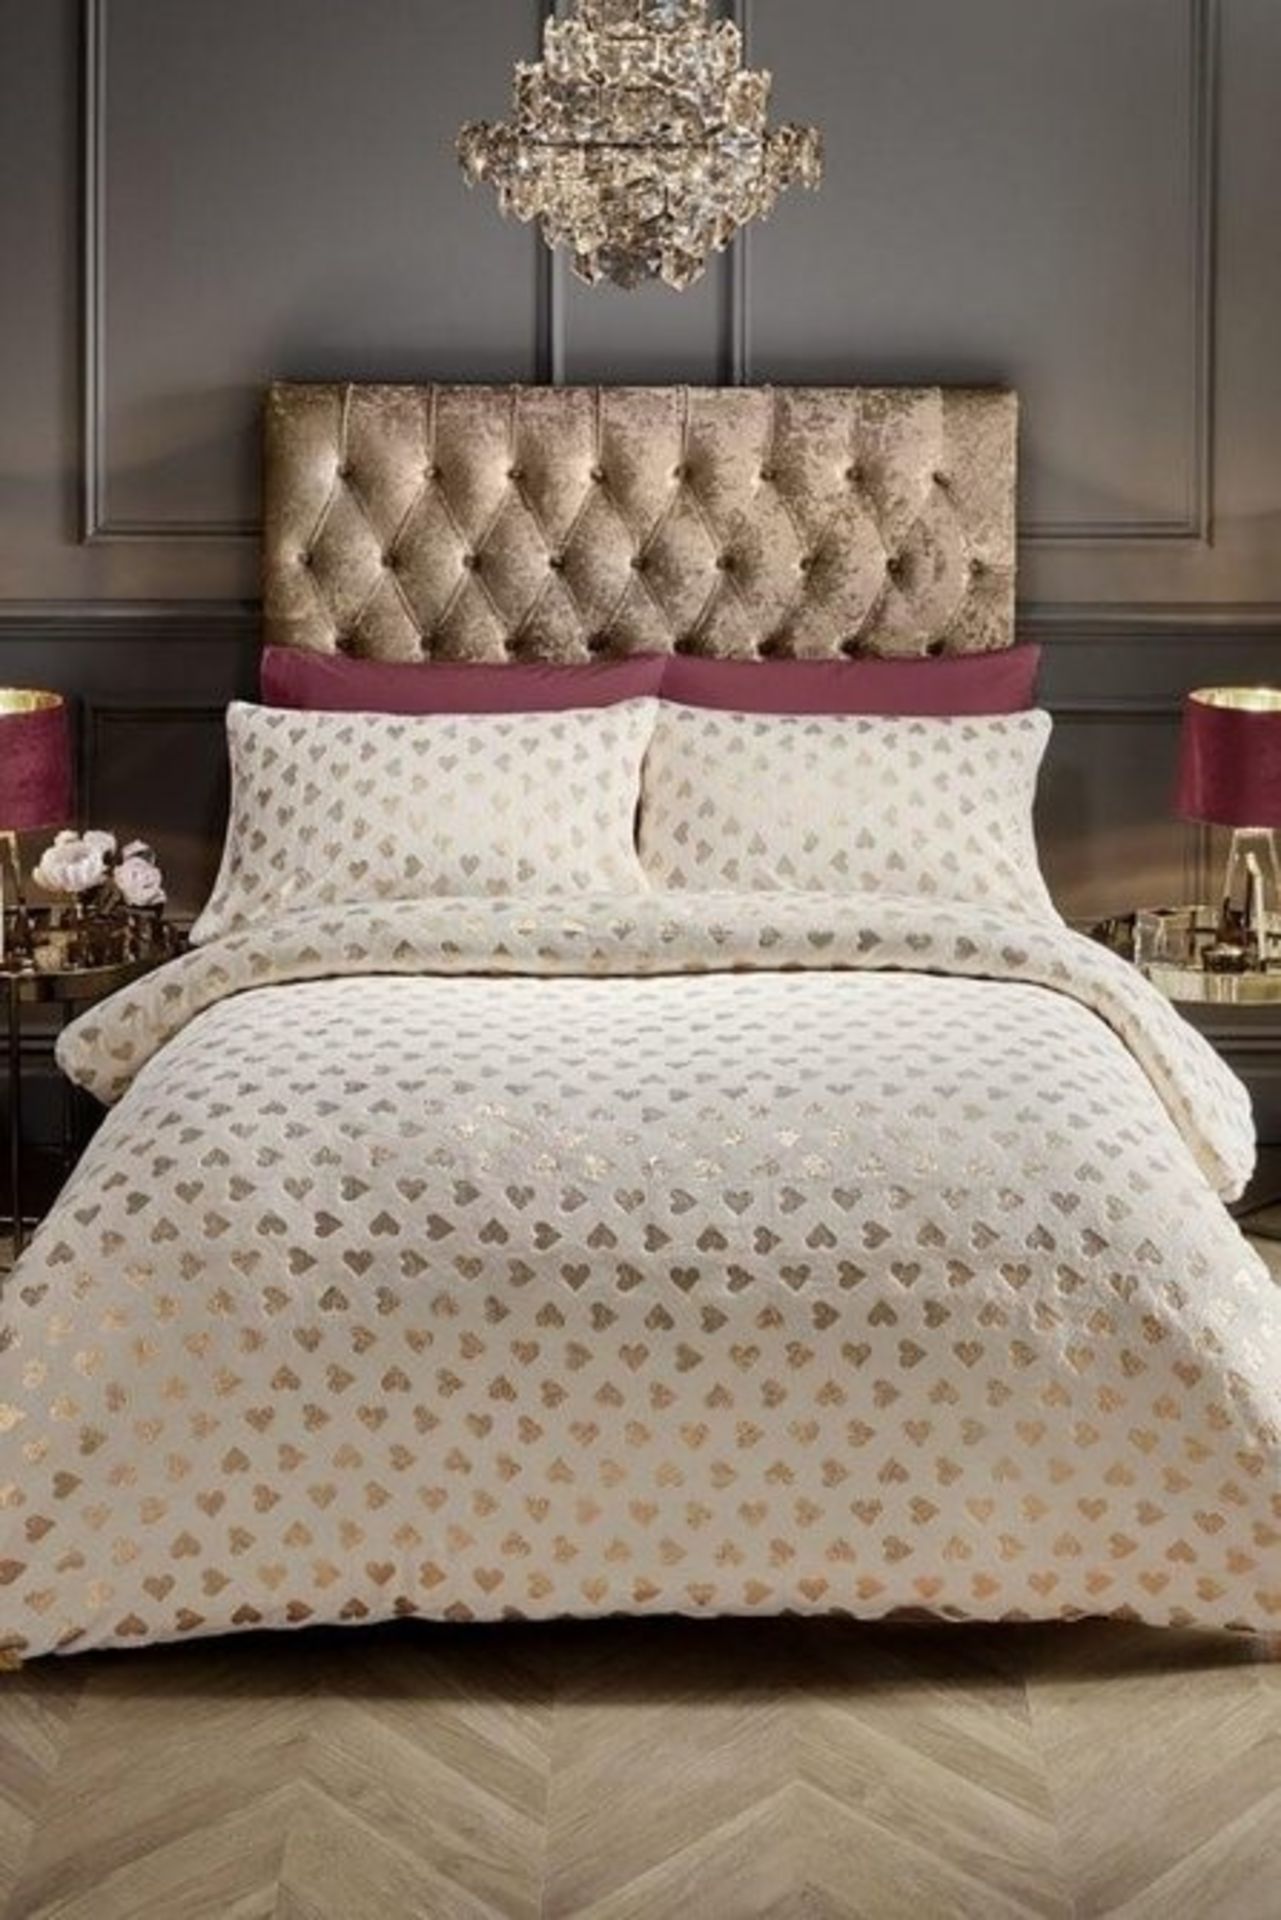 1 AS NEW BAGGED ULTRA COSY TEDDY HEART FOIL DUVET SET IN CREAM / SINGLE (PUBLIC VIEWING AVAILABLE)